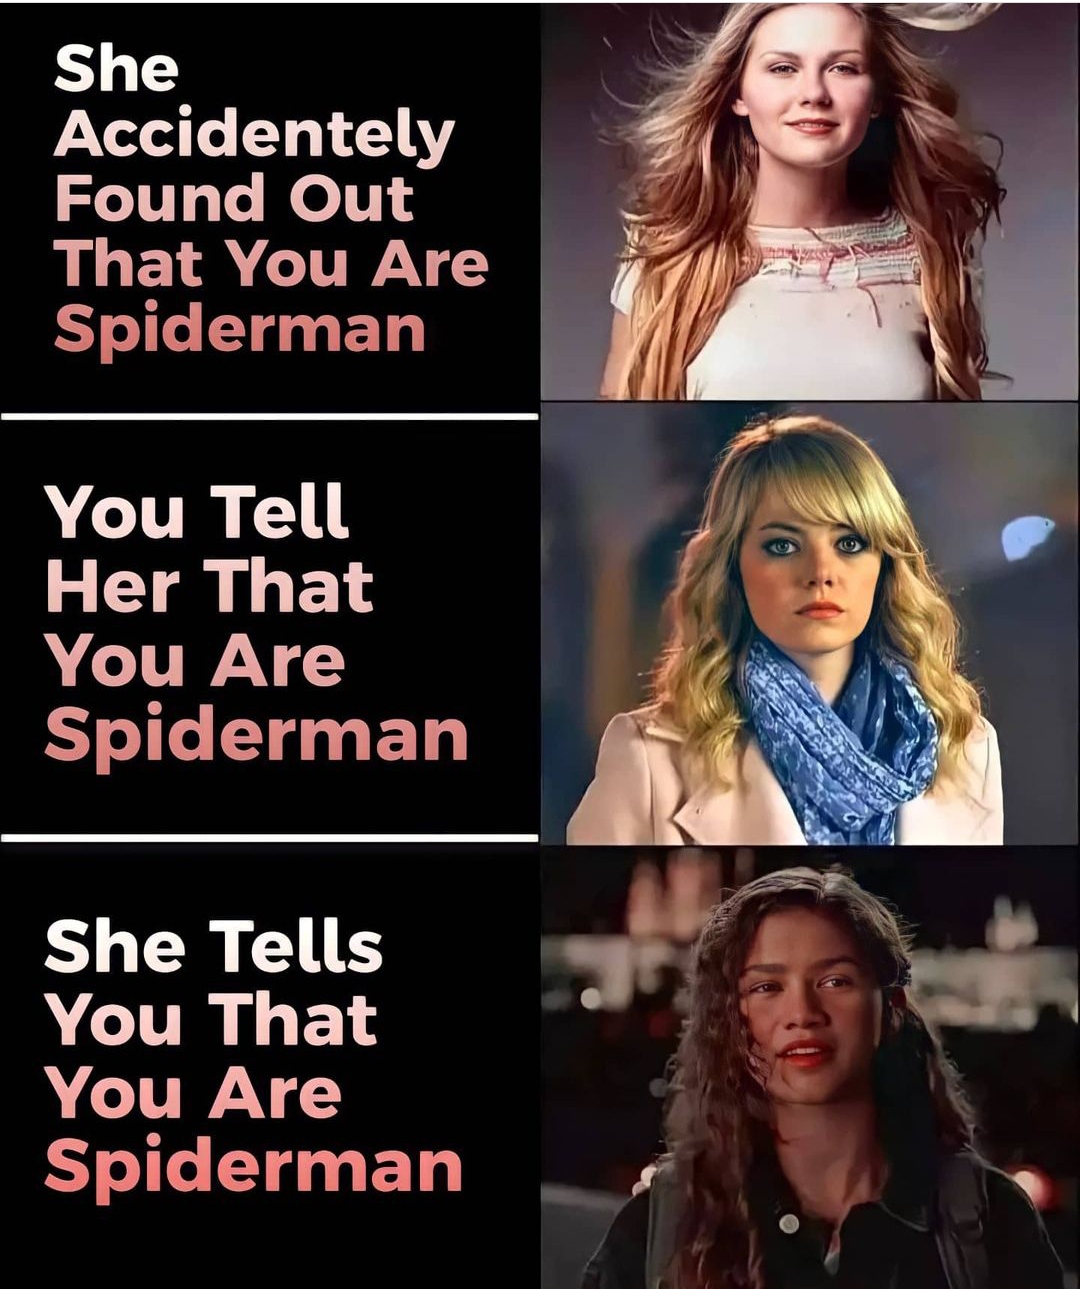 she tell you that you are spiderman - She Accidentely Found Out That You Are Spiderman You Tell Her That You Are Spiderman She Tells You That You Are Spiderman